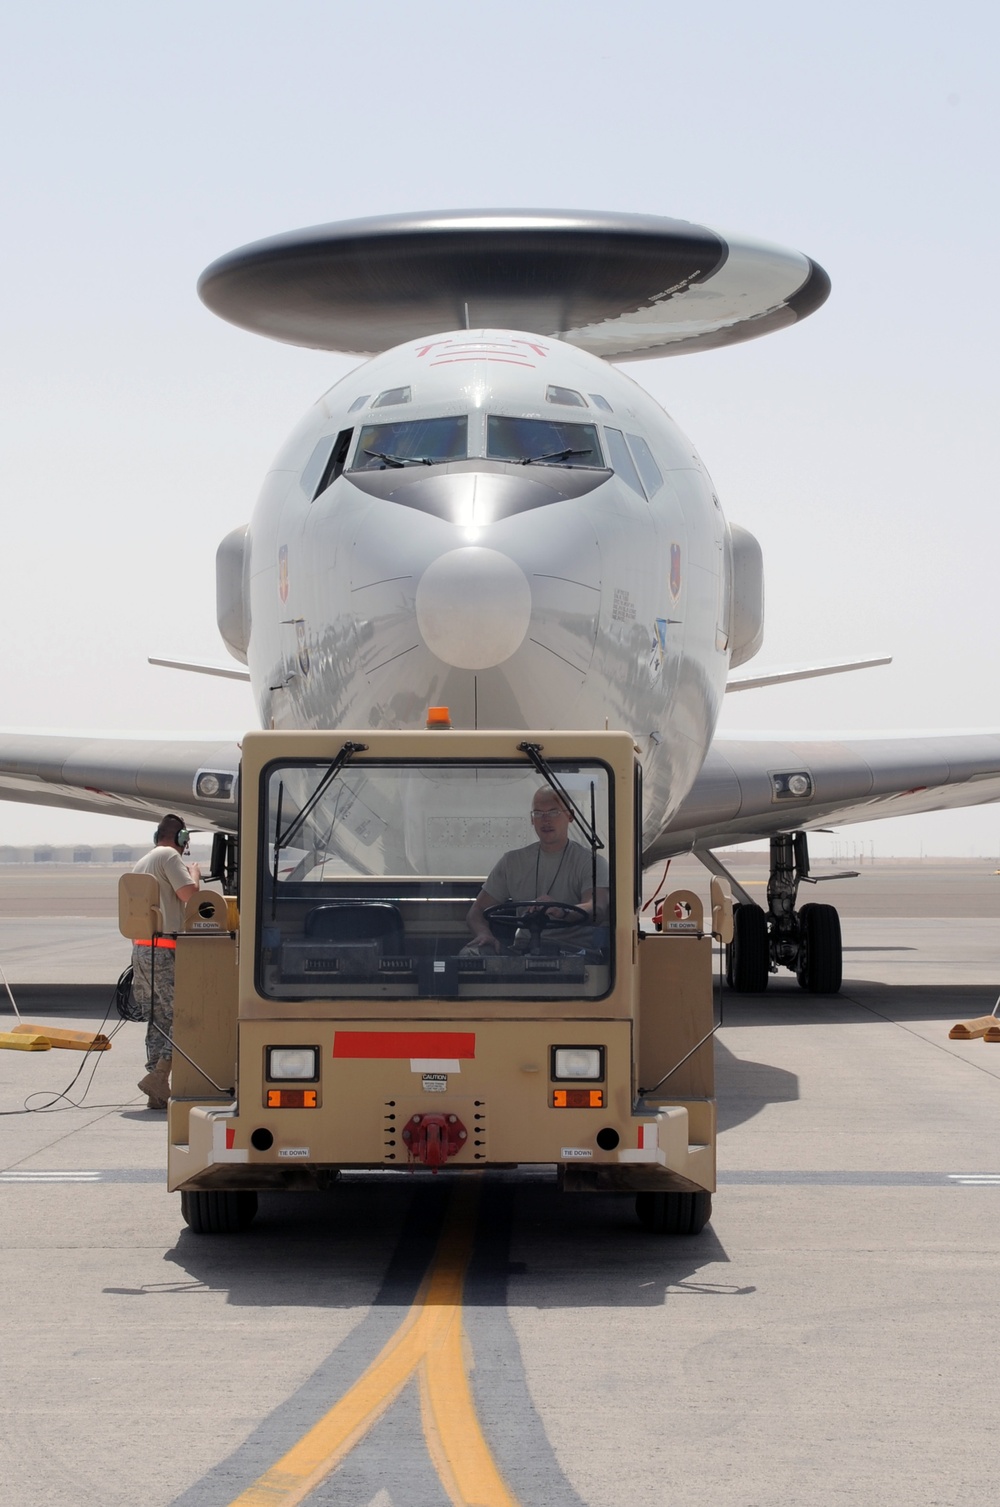 Thirty-three Years Later, E-3 Sentry Still Going Strong